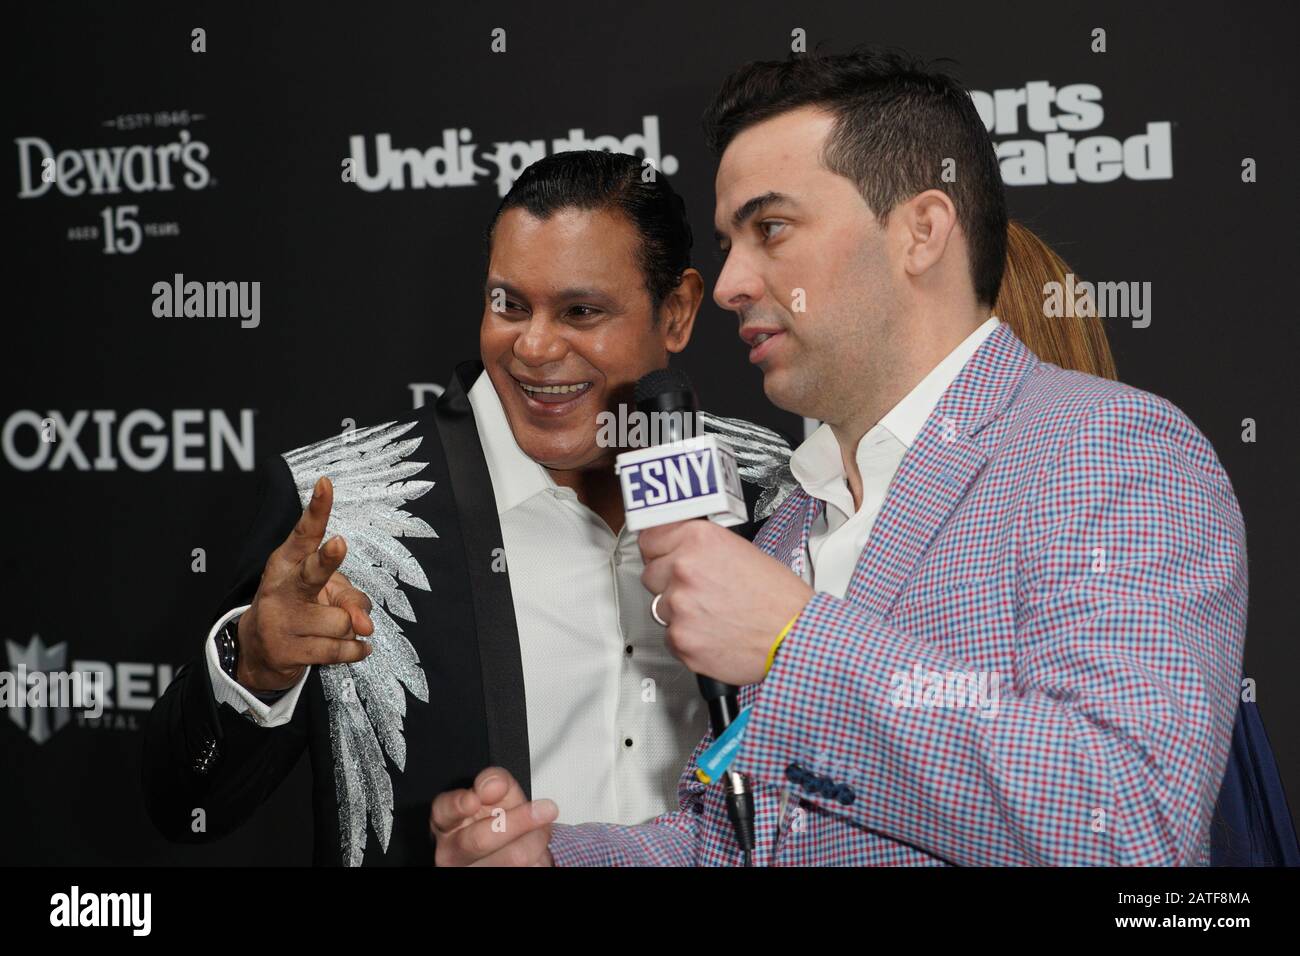 Miami, USA. 01st Feb, 2020. Sammy Sosa at Sports Illustrated The Party at  the Fontainebleau Hotel on February 1, 2020 in Miami, Florida. Credit:  MediaPunch Inc/Alamy Live News Stock Photo - Alamy